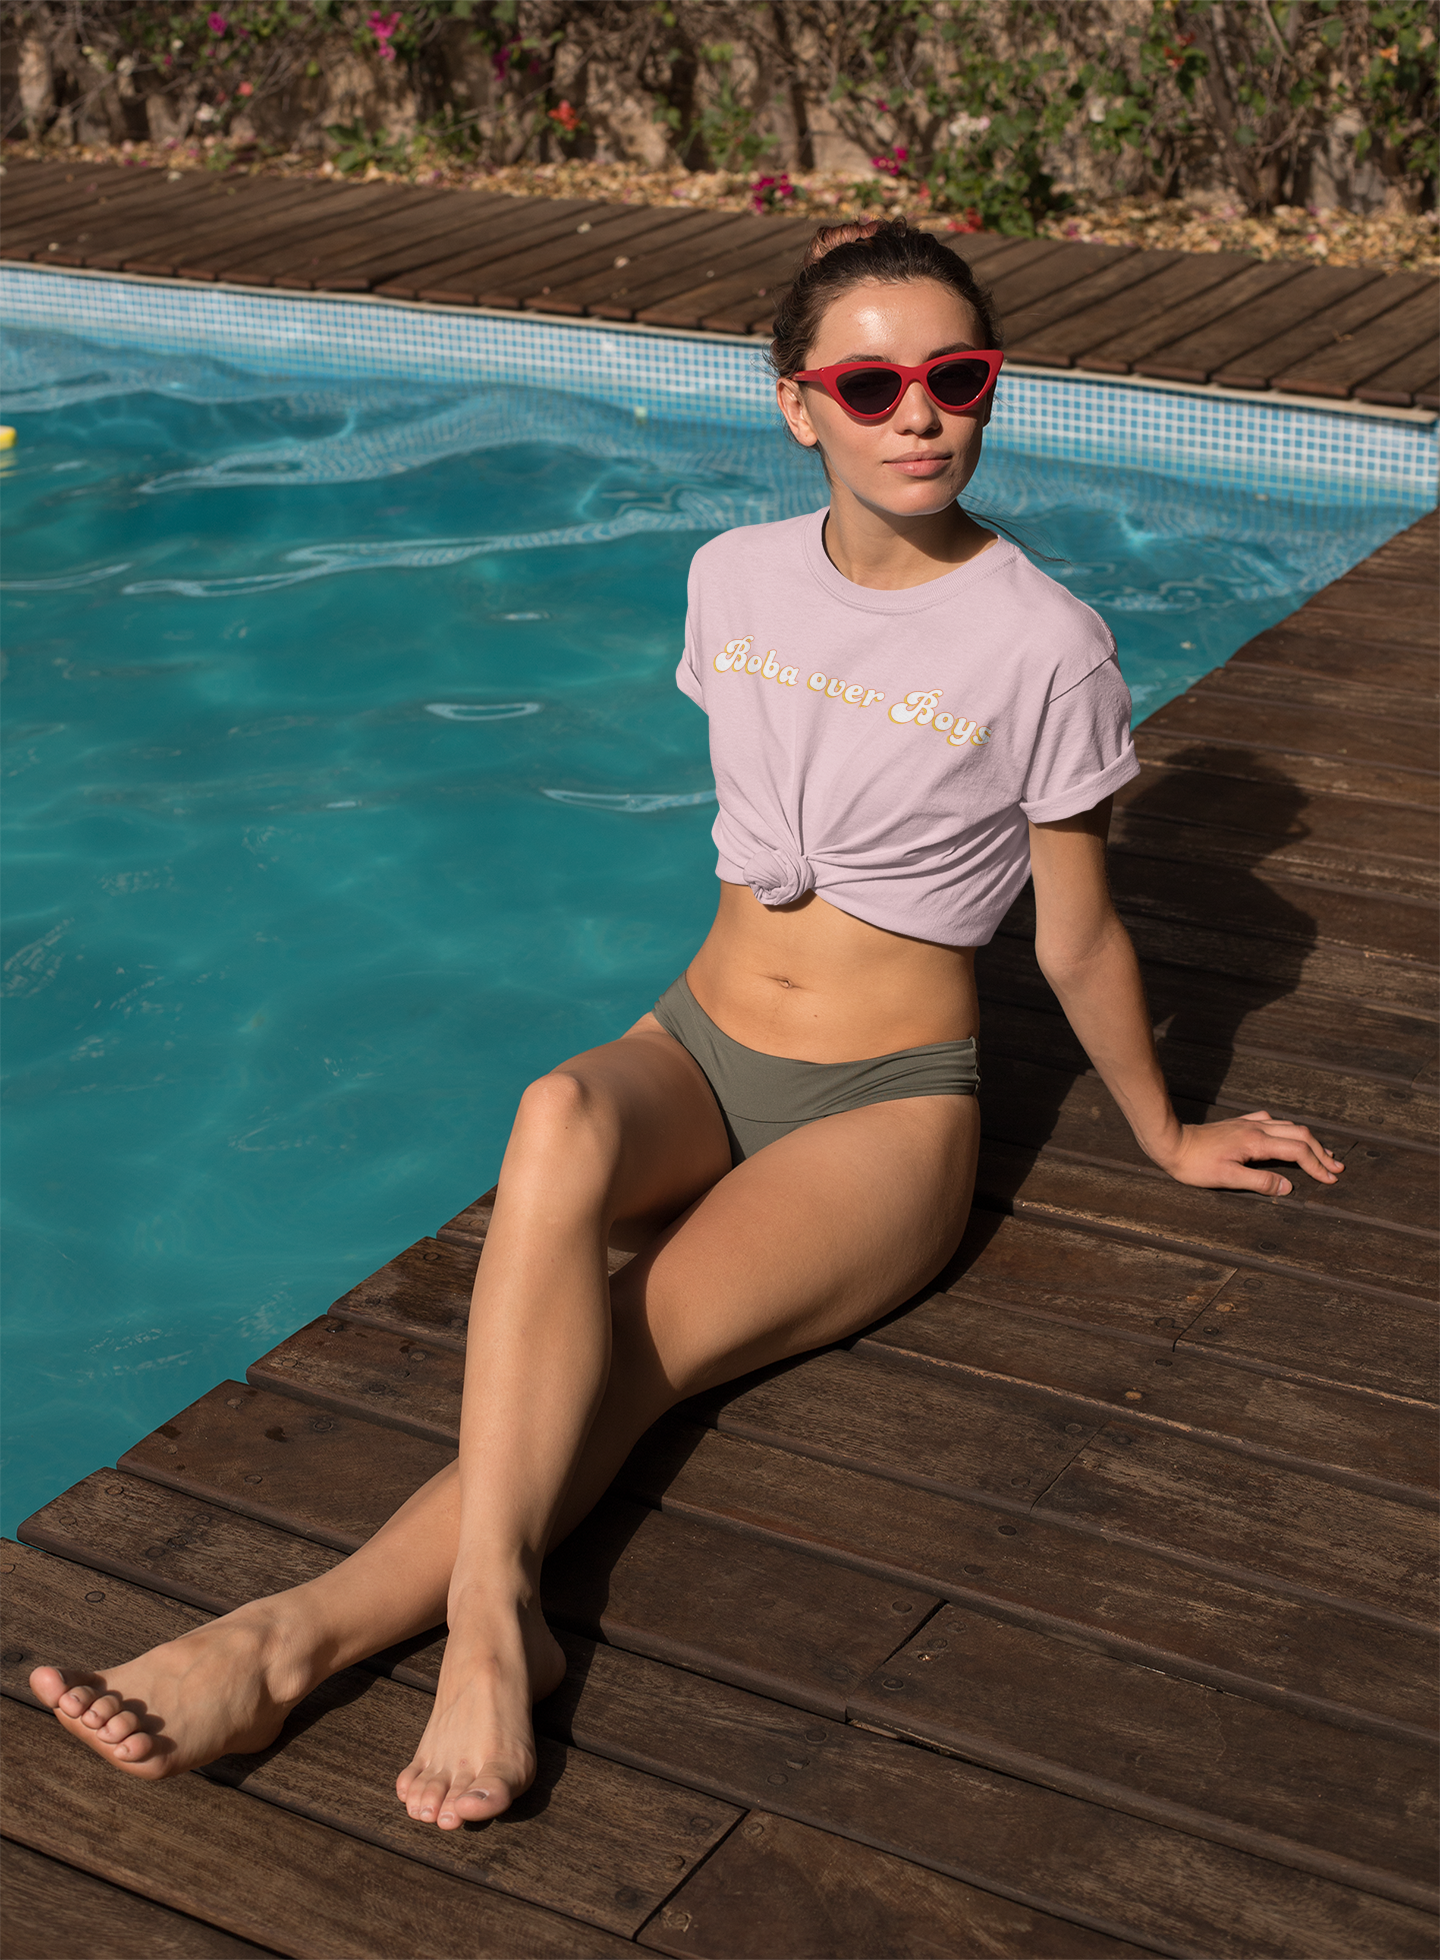 Woman wearing Boba over Boys boba shirt by the pool